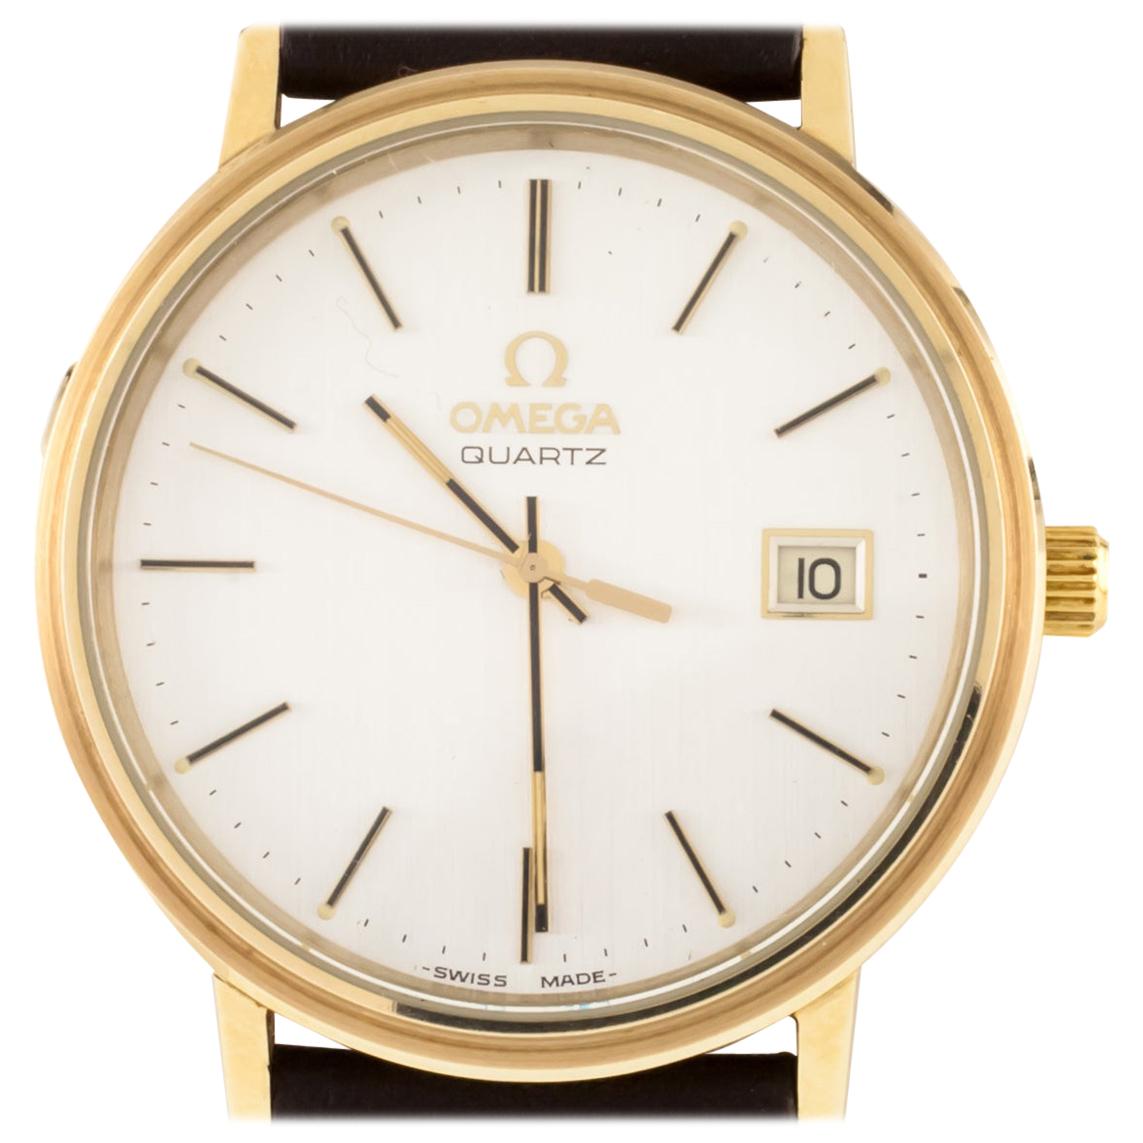 Omega Men's Quartz Gold-Plated Watch w/ Leather Band Model #1342